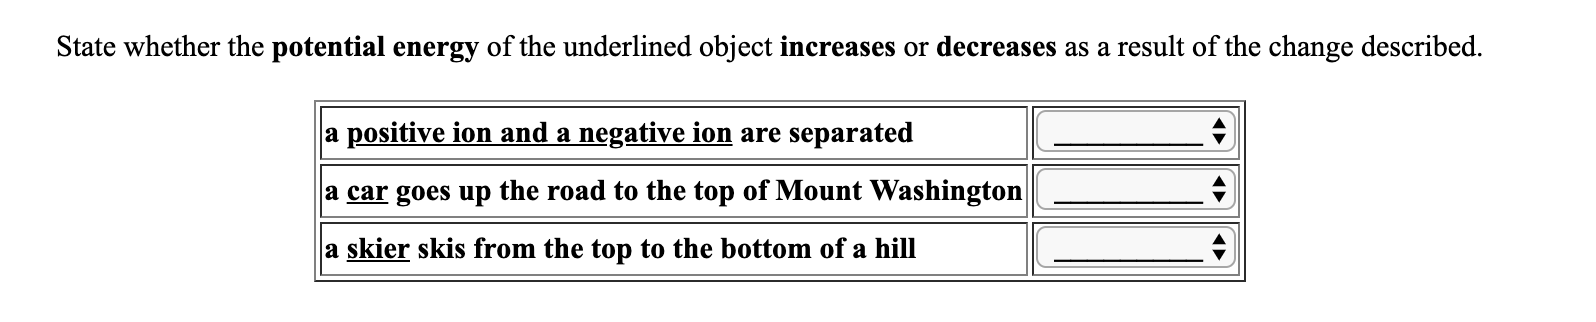 State whether the potential energy of the underlined object increases or decreases as a result of the change described.
a positive ion and a negative ion are separated
a car goes up the road to the top of Mount Washington |
a skier skis from the top to the bottom of a hill
^
